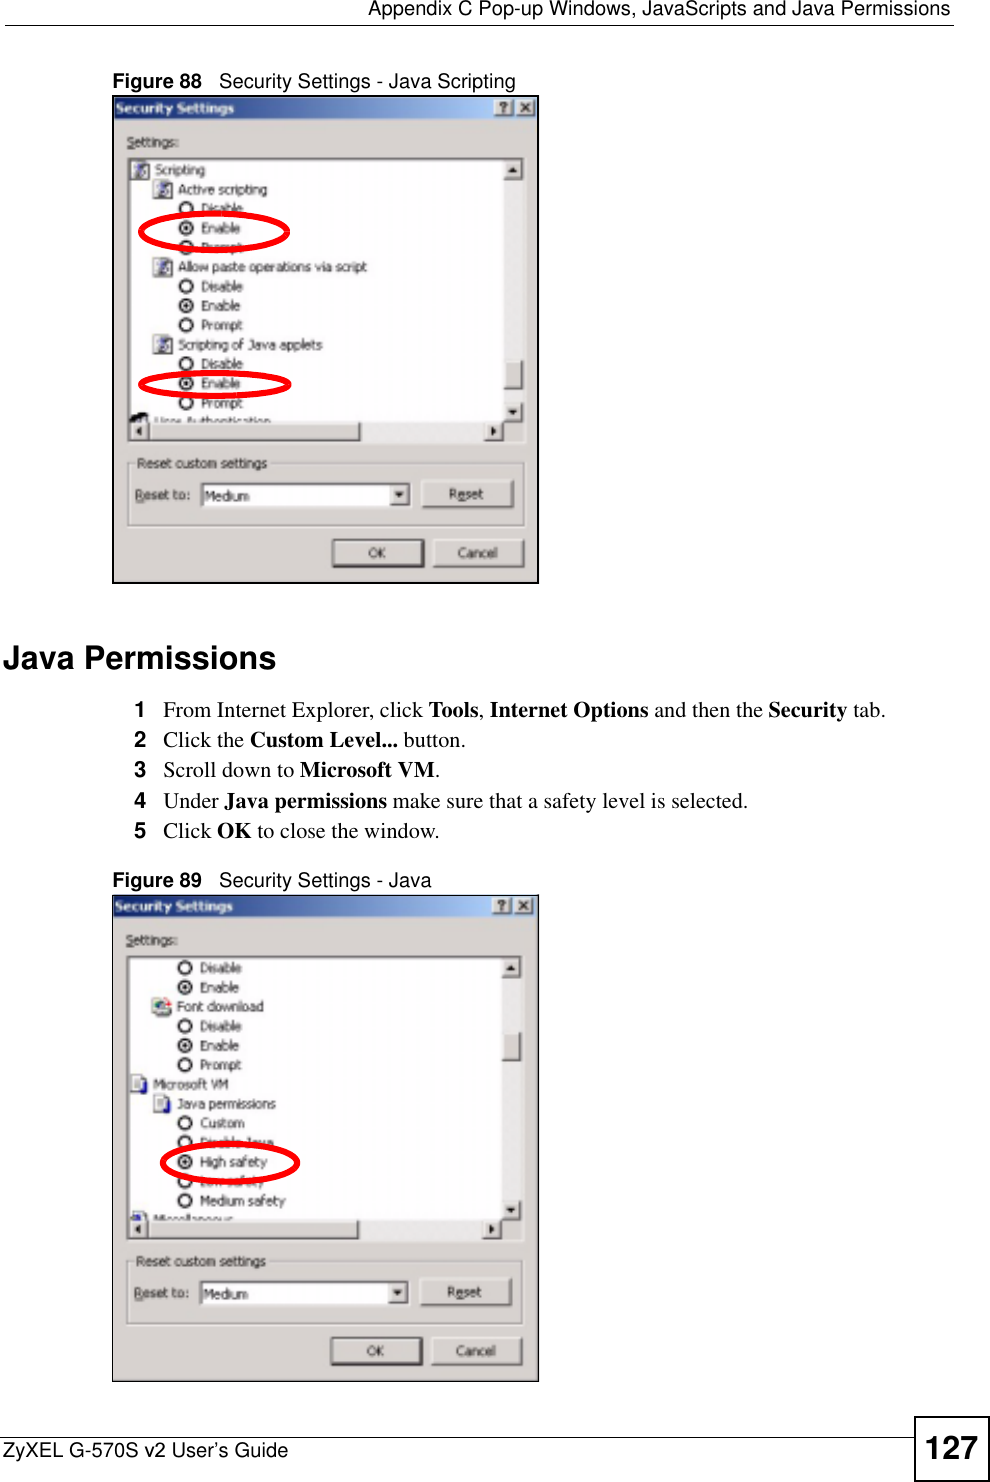  Appendix C Pop-up Windows, JavaScripts and Java PermissionsZyXEL G-570S v2 User’s Guide 127Figure 88   Security Settings - Java ScriptingJava Permissions1From Internet Explorer, click Tools,Internet Options and then the Security tab. 2Click the Custom Level... button. 3Scroll down to Microsoft VM.4Under Java permissions make sure that a safety level is selected.5Click OK to close the window.Figure 89   Security Settings - Java 